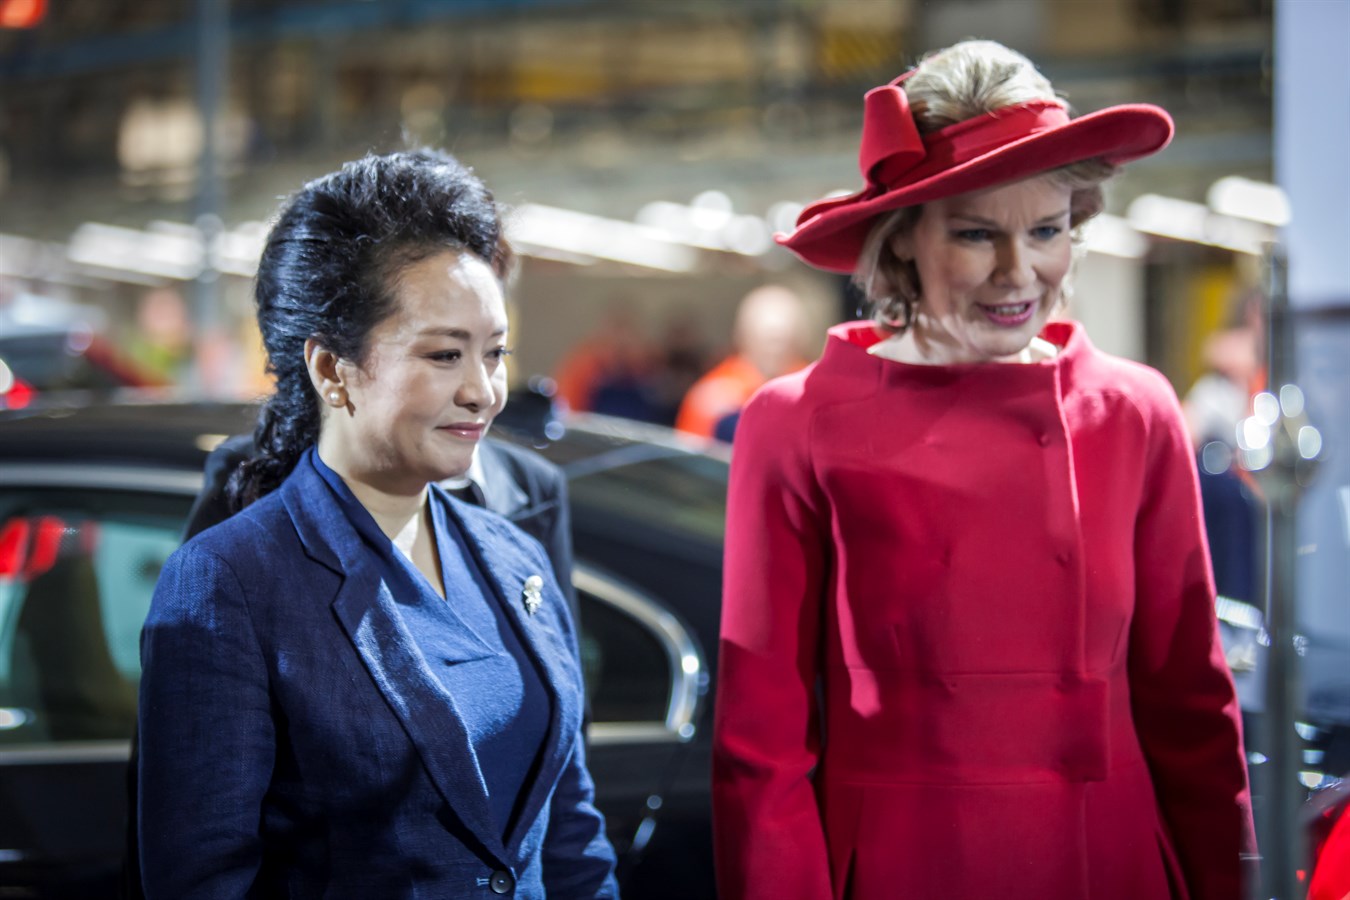 Chinese President, Belgian King and Queen visit Volvo Cars plant in Ghent